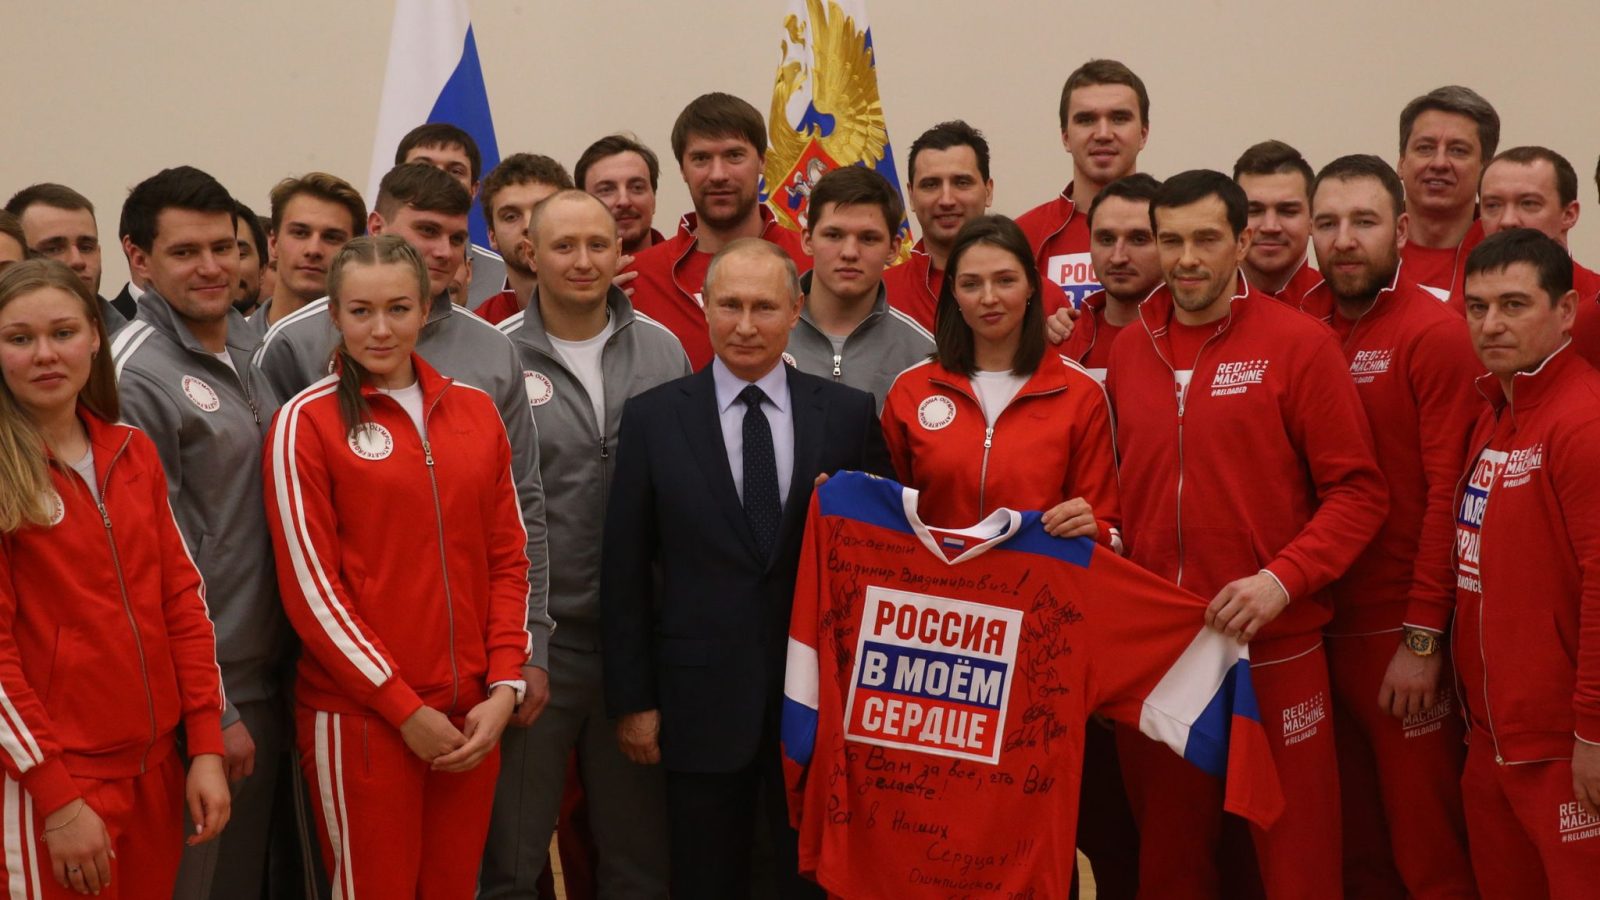 Russia Gets Shunned by the Sports World as a Result of its Invasion of Ukraine